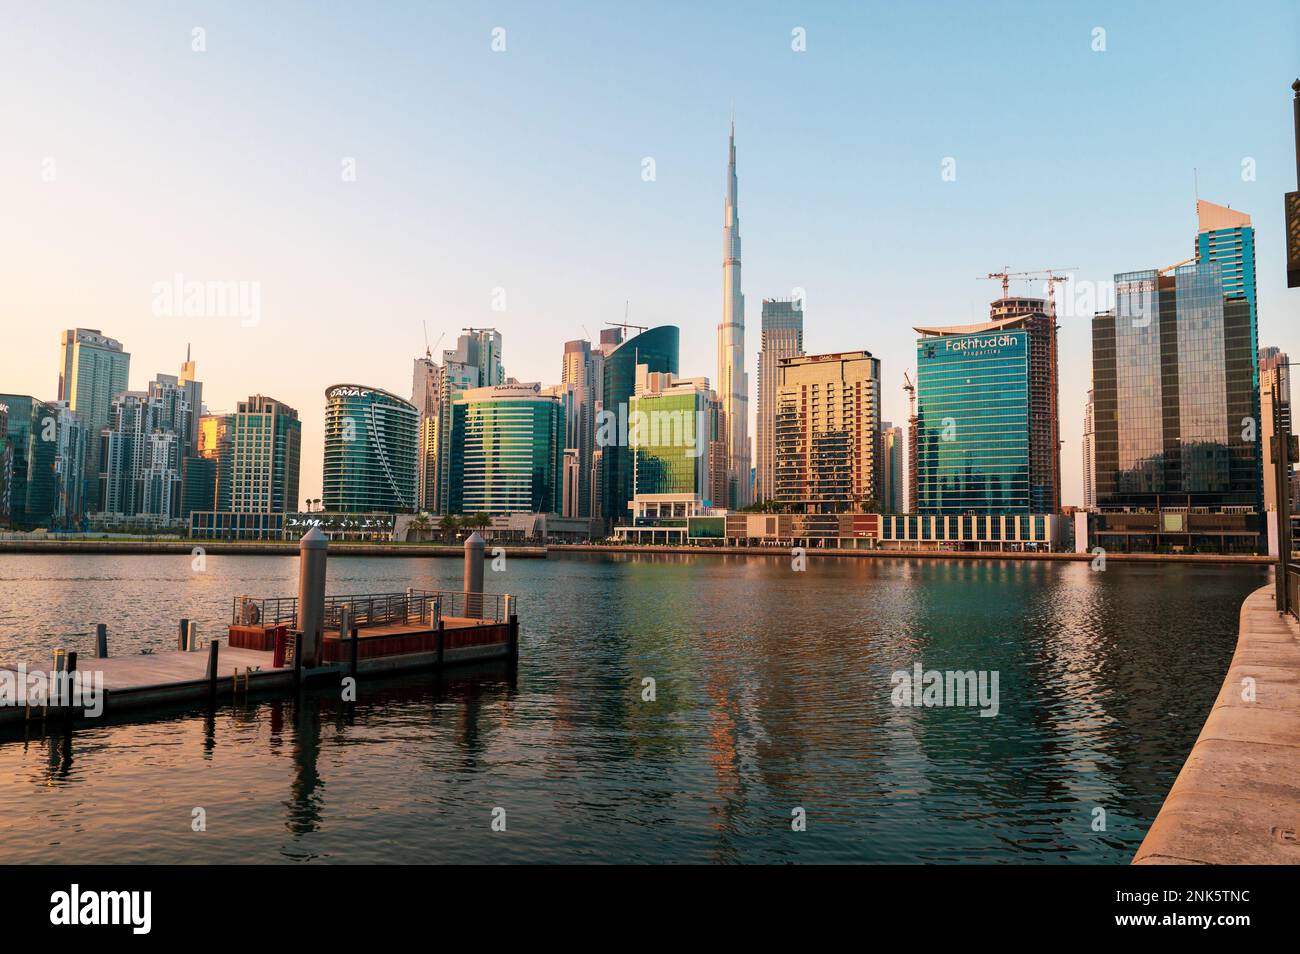 Dubai, United Arab Emirates - September 10, 2022: Dubai Skyline of a bustling downtown city seen from the Business bay area, surrounded by skyscrapers Stock Photo